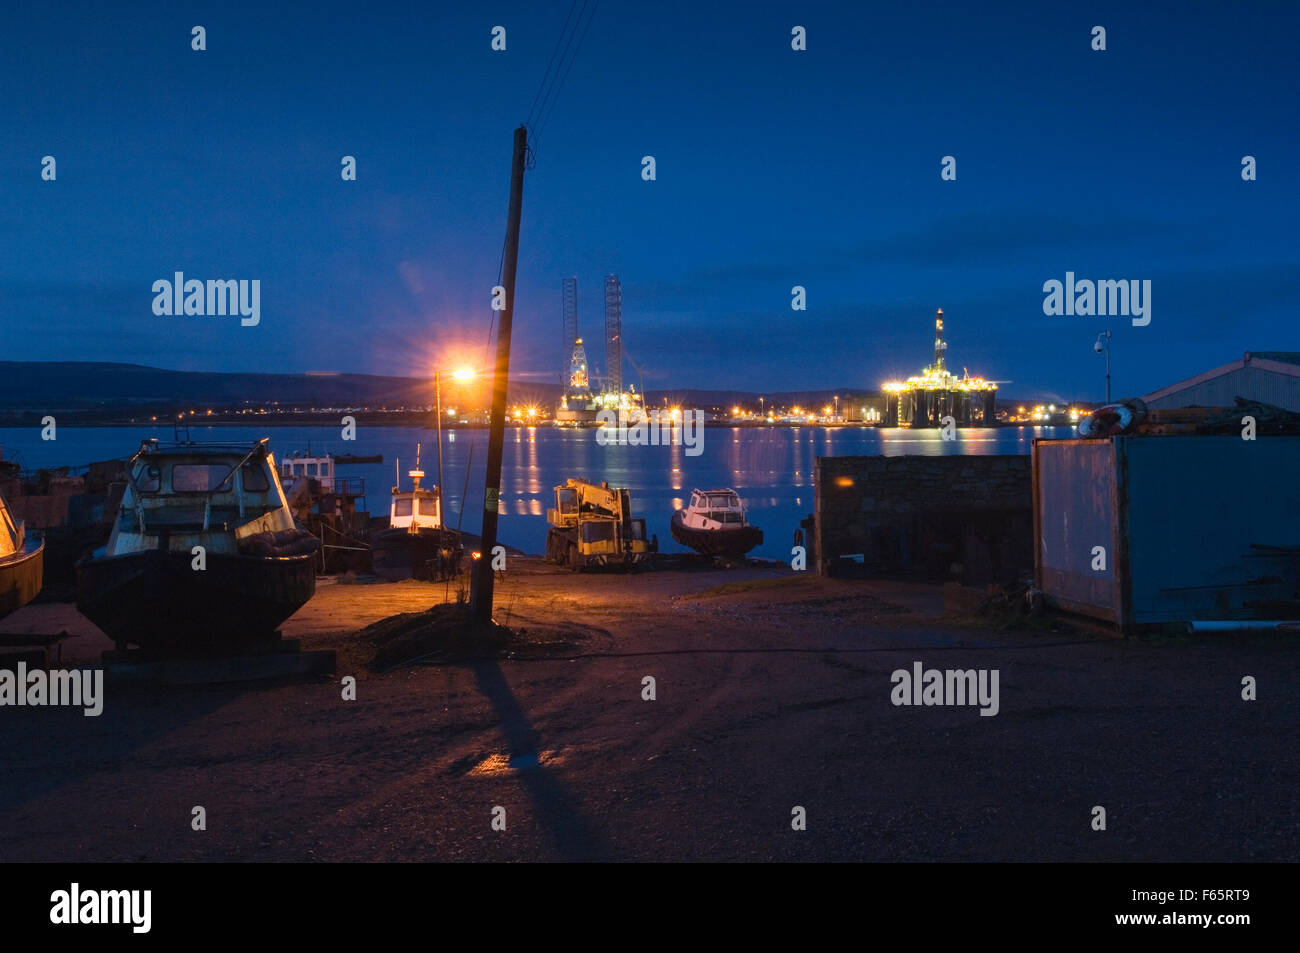 Invergordon with oil rigs at night from Balblair, Ross-shire, Scotland. Stock Photo